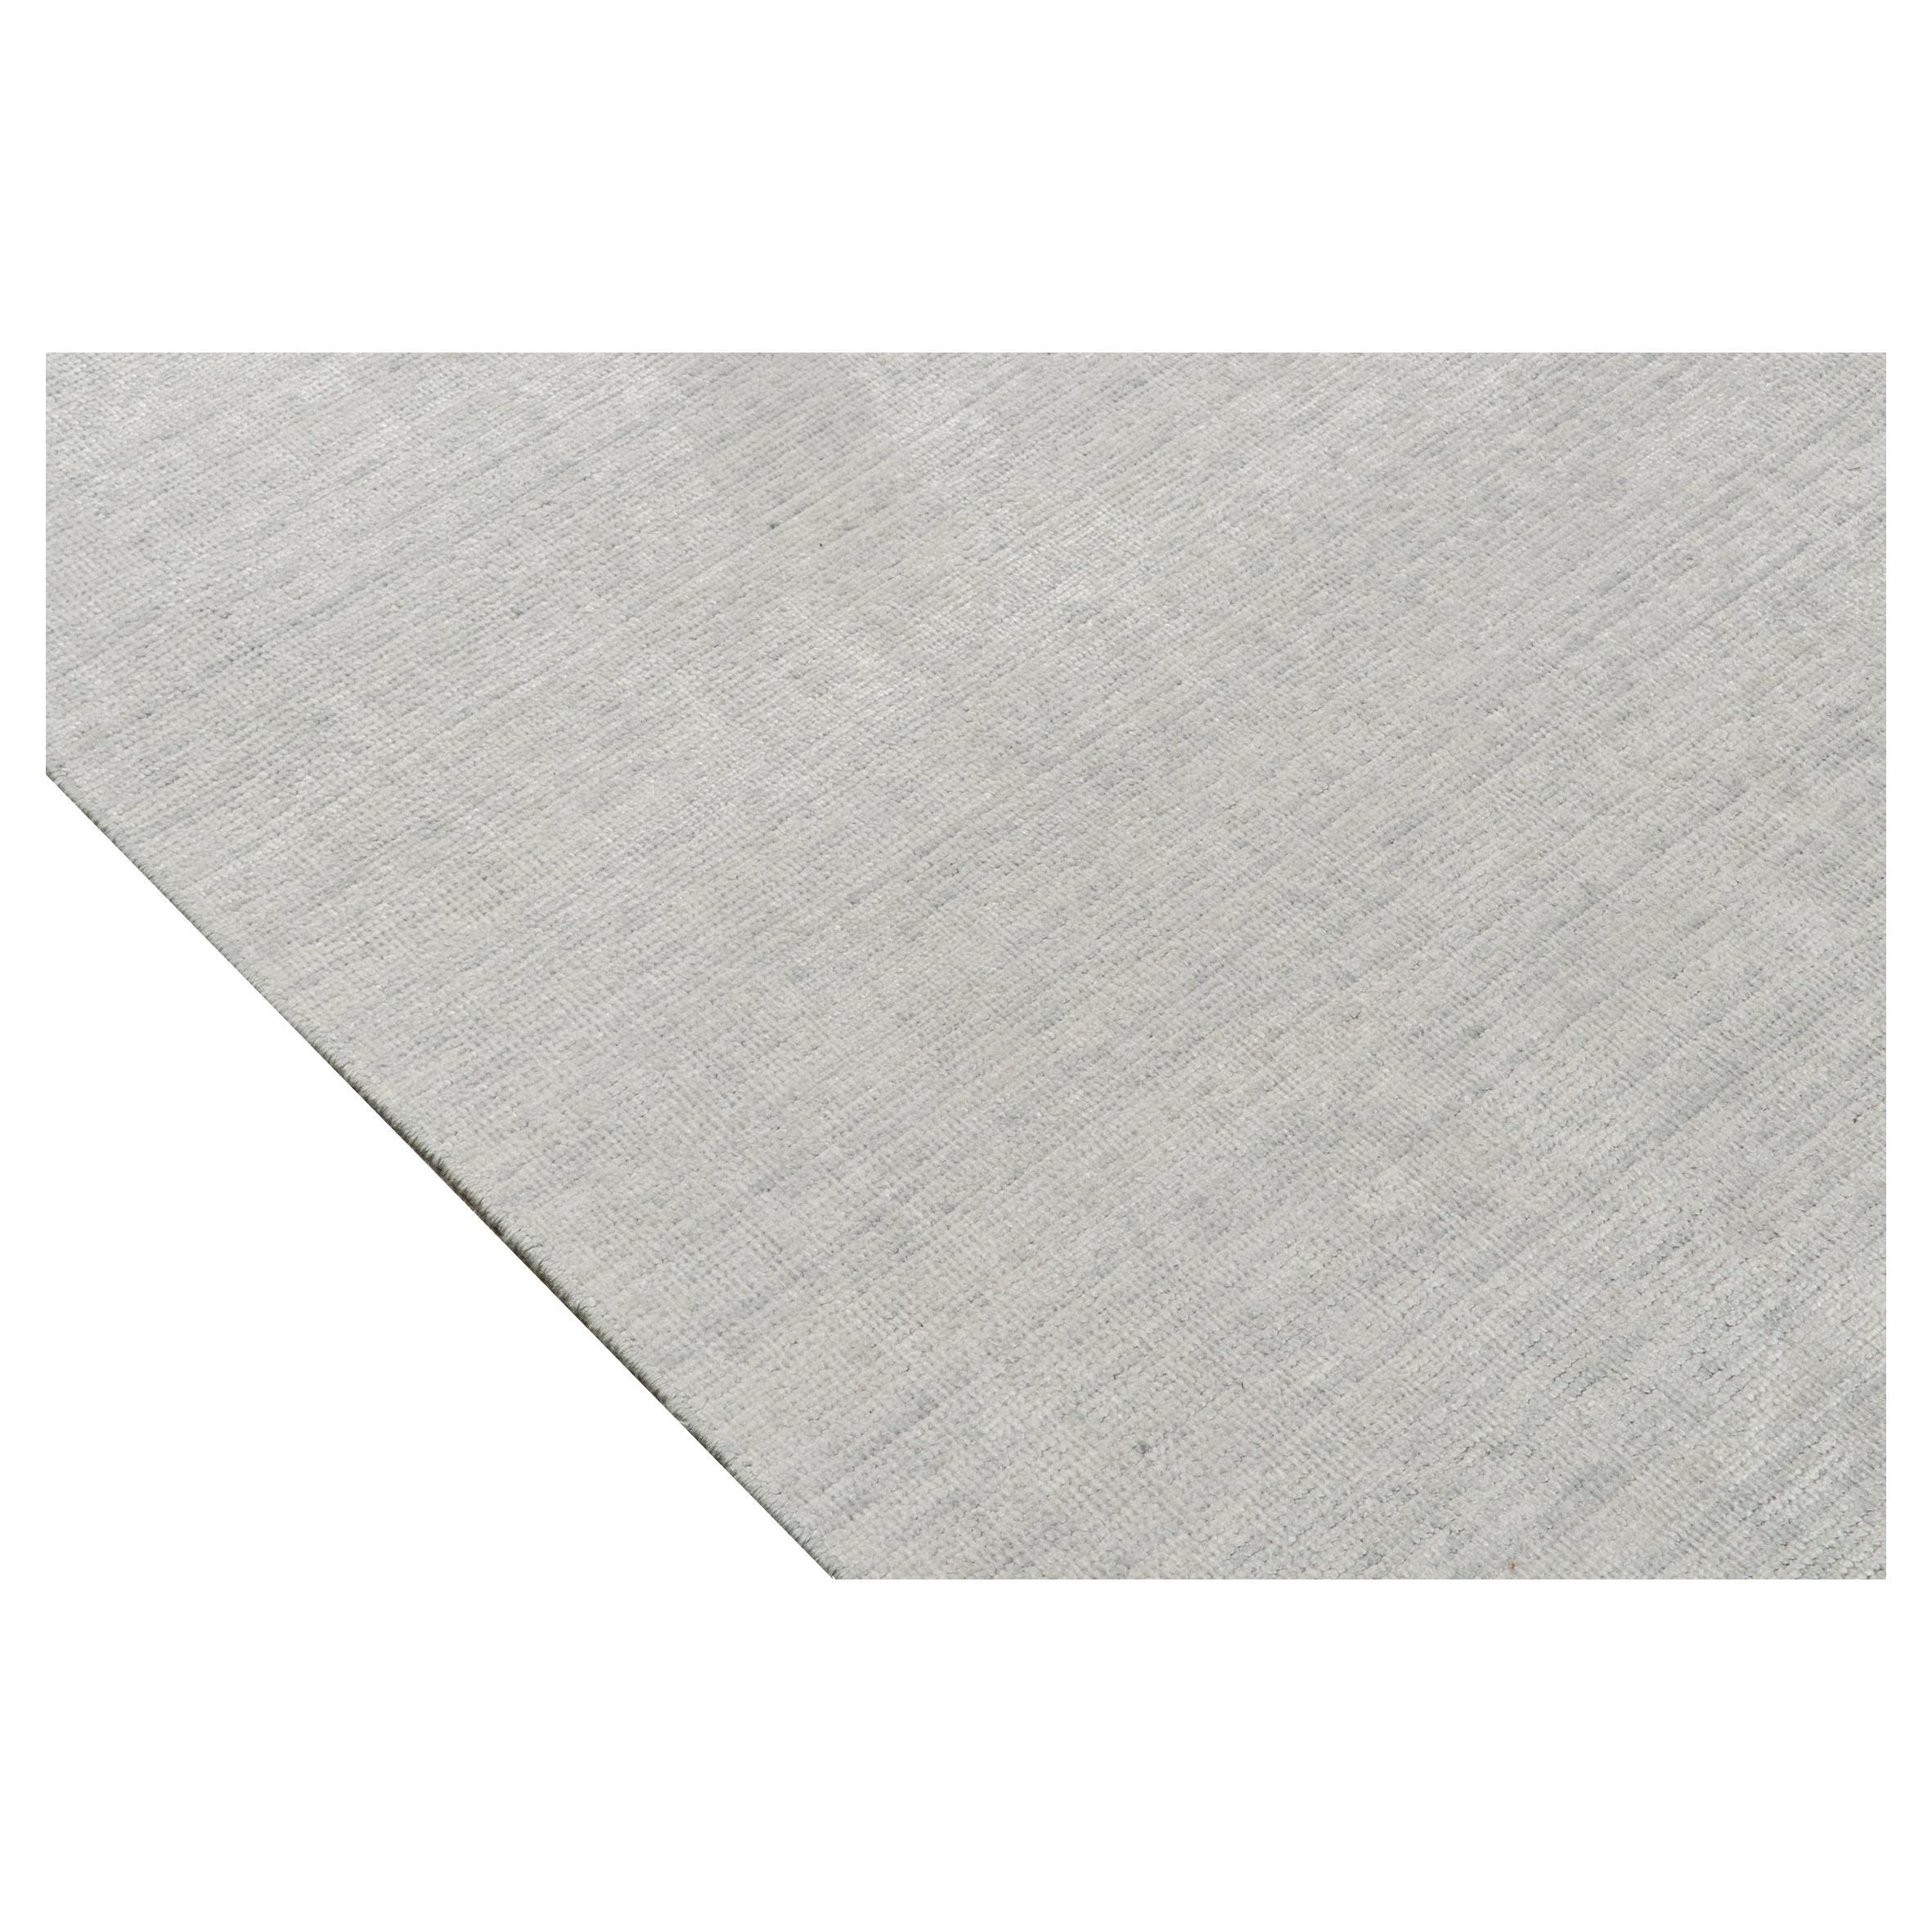 Hand-Knotted Rug & Kilim’s Plain Modern Rug in Solid Silver-Gray Tone-on-Tone For Sale